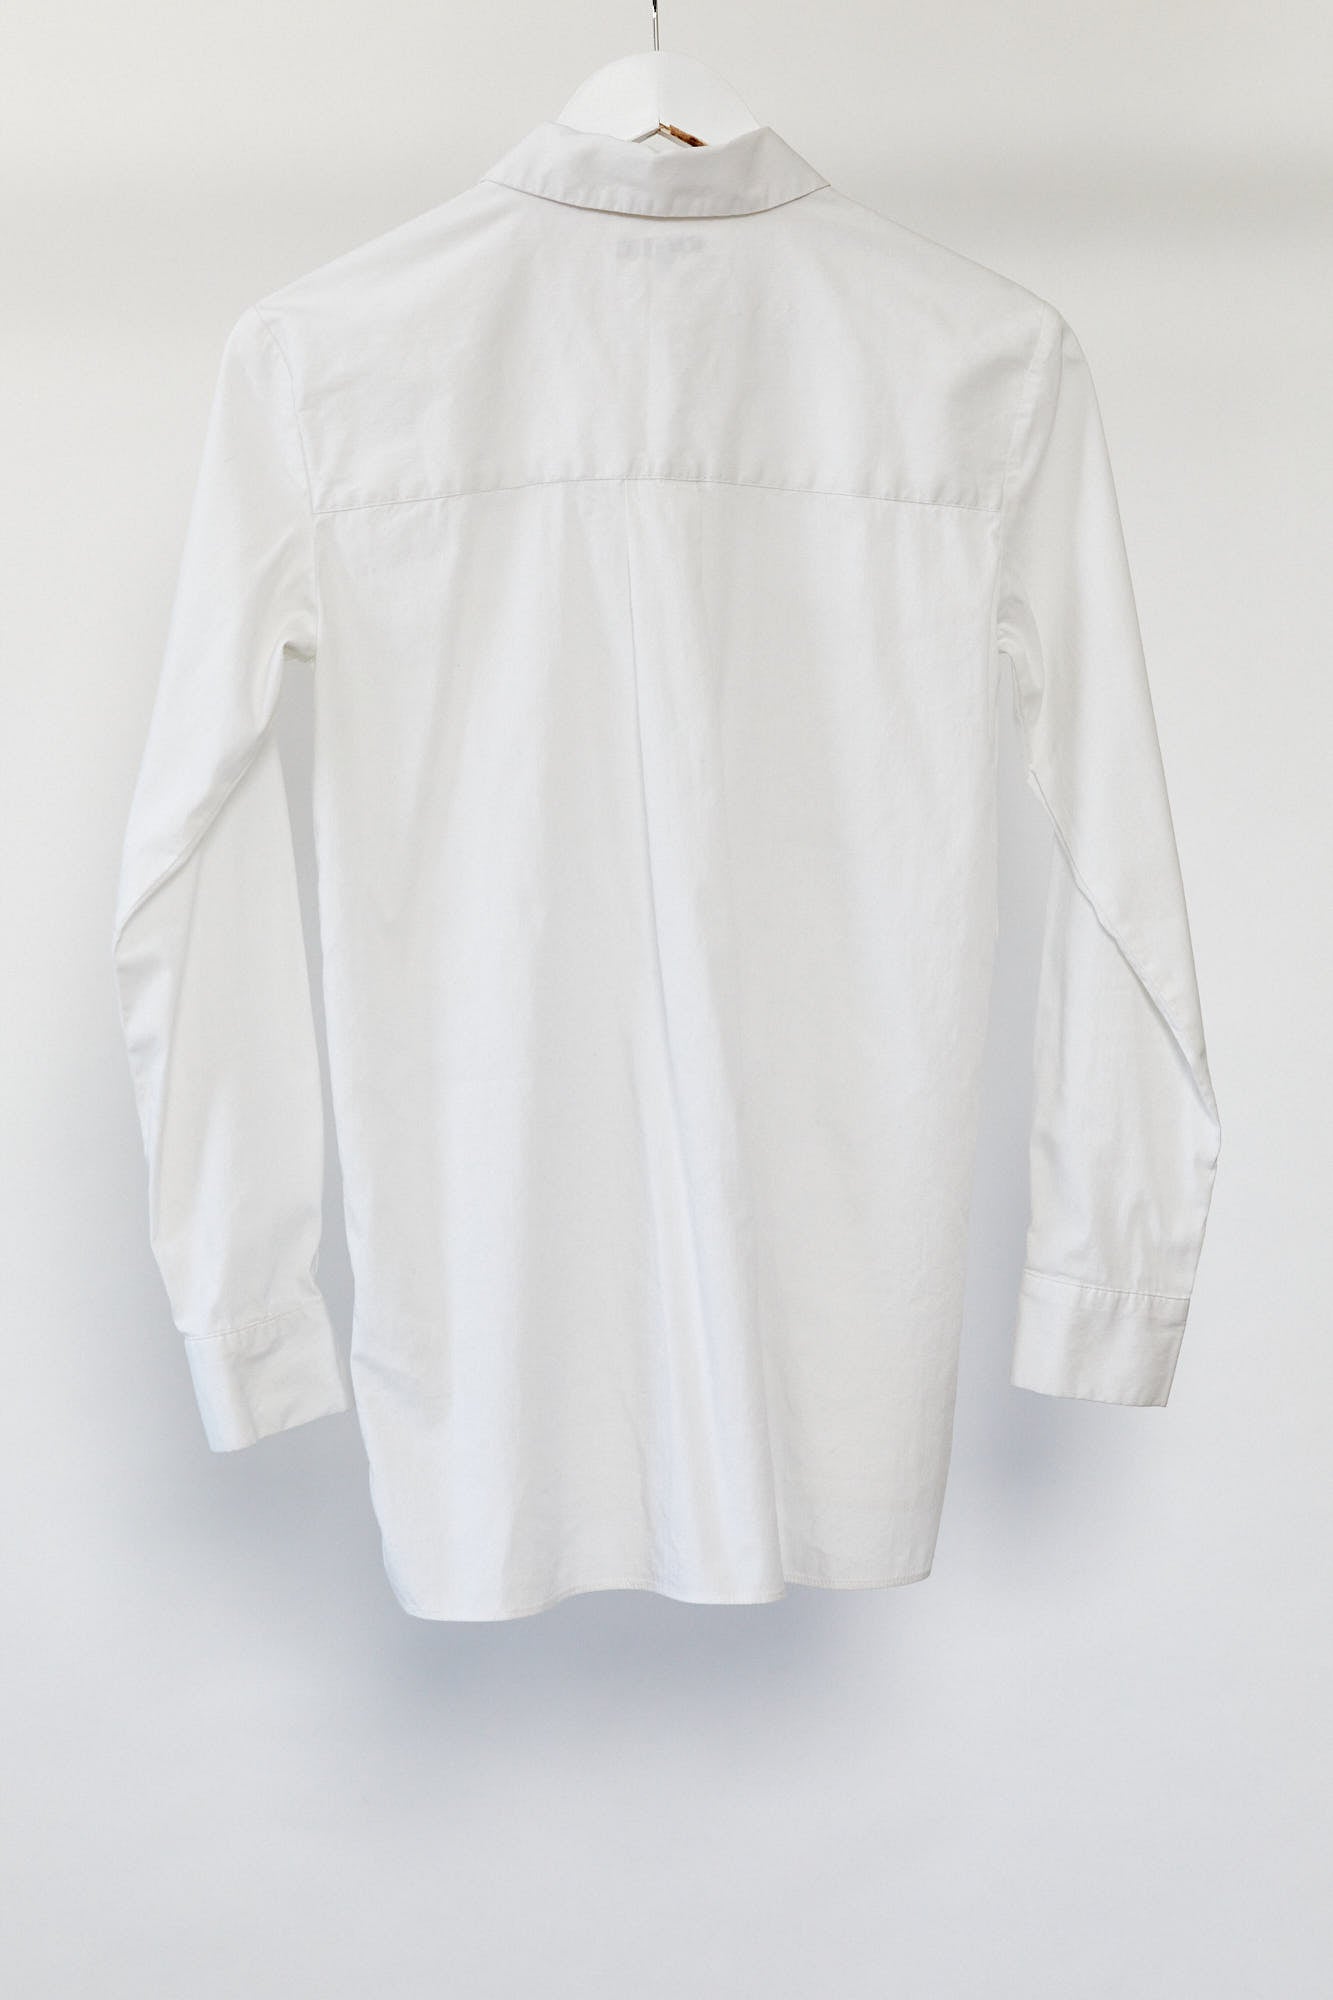 Womens Warehouse white shirt size 8 or small